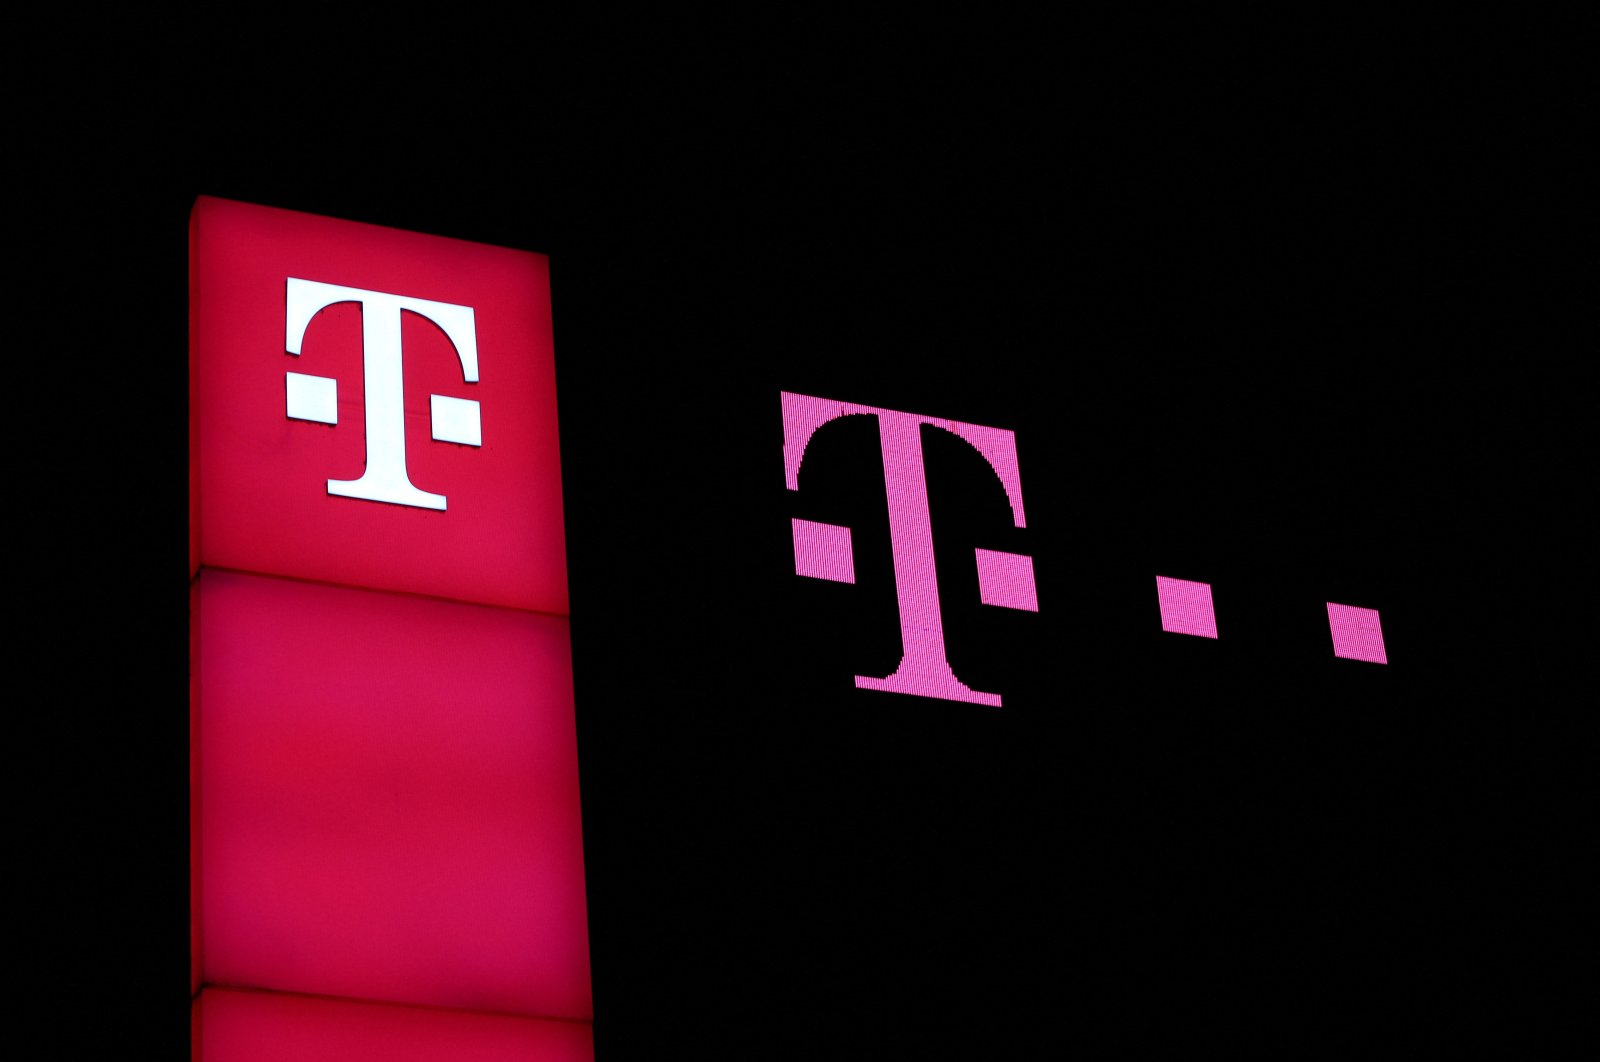 Deutsche Telekom signs are pictured at the headquarters of the German telecoms giant in Bonn, Germany, March 20, 2022. (Reuters Photo)